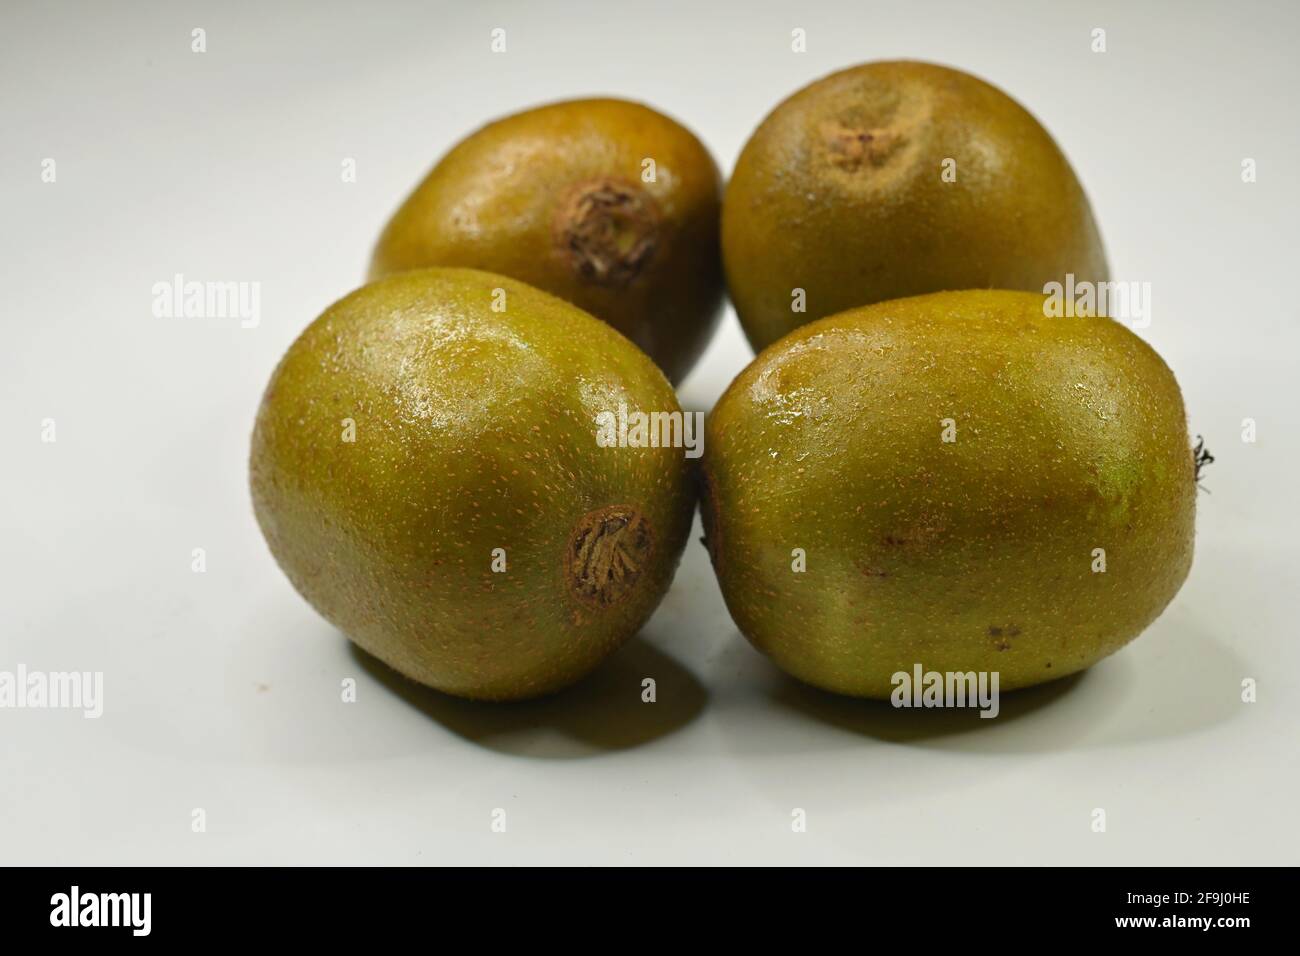 Bunch of red Kiwifruit or Chinese gooseberry (genus Actinidia) on white background. The red kiwifruit is said to be sweeter, juicy and less astringent Stock Photo